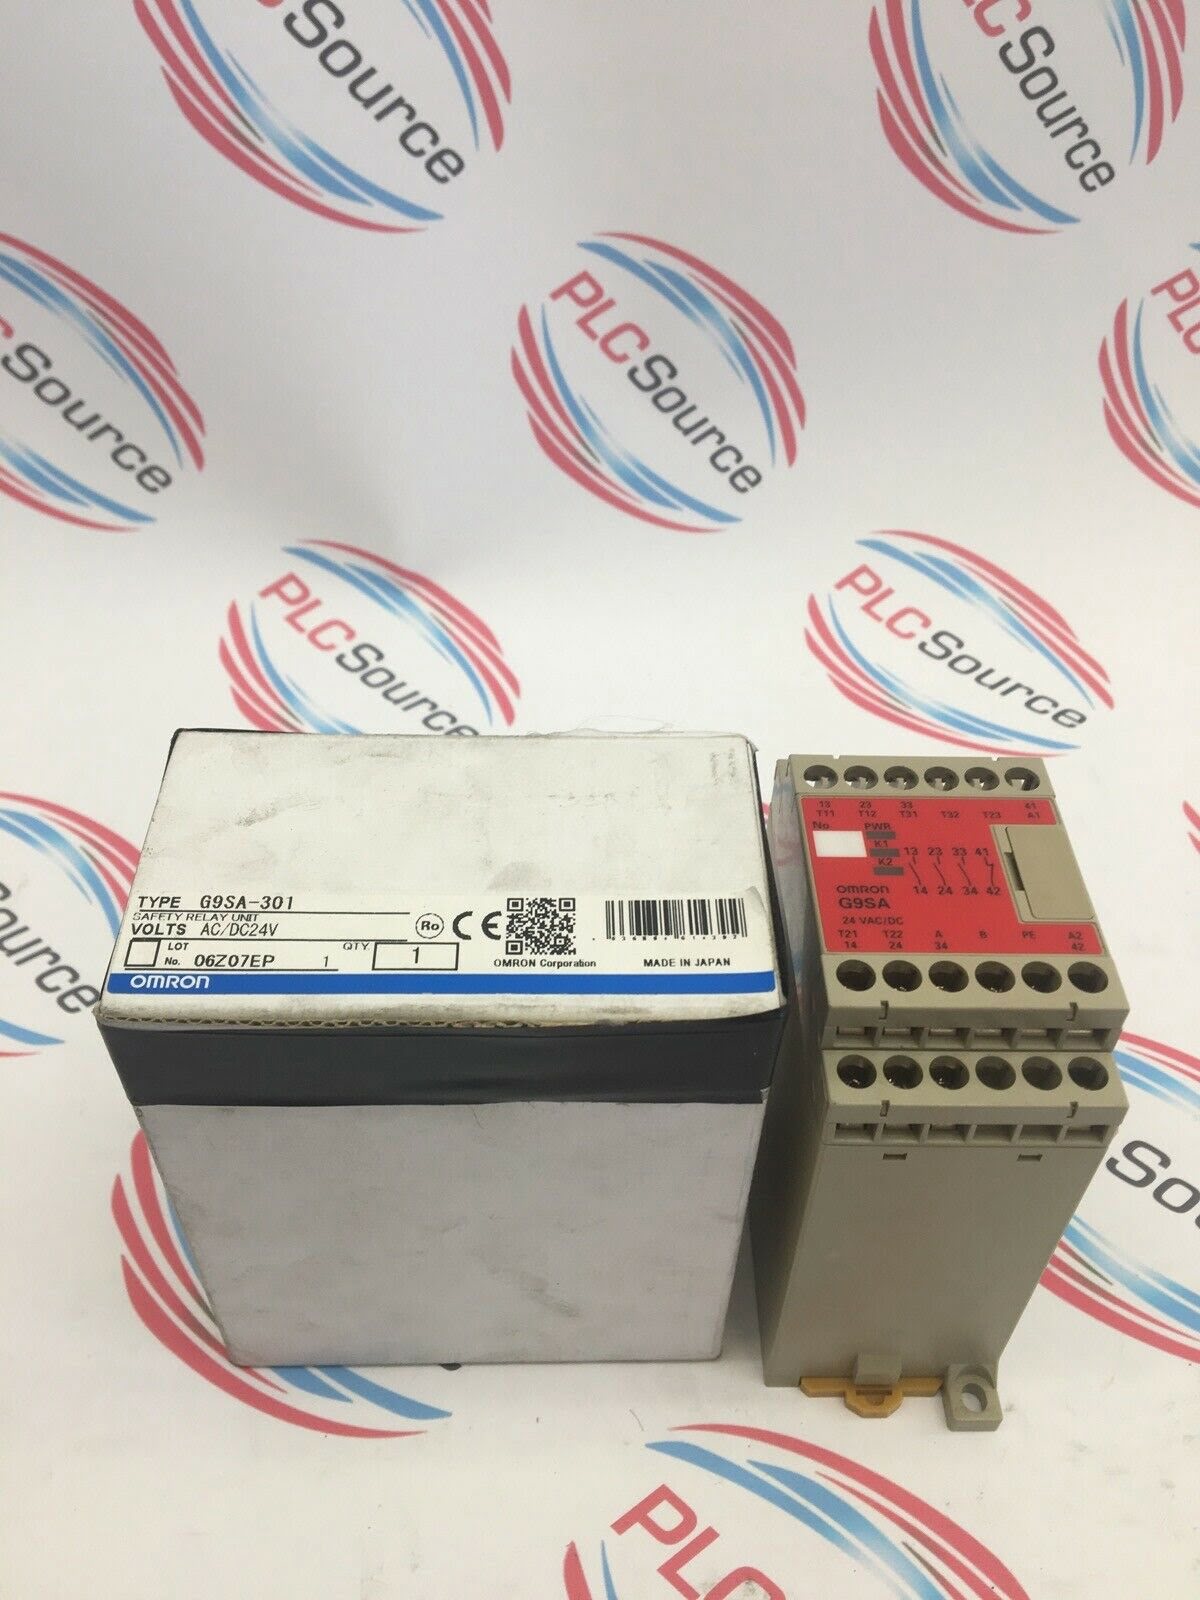 Details about   OMRON G9SA-301 SAFETY RELAY UNIT NEW